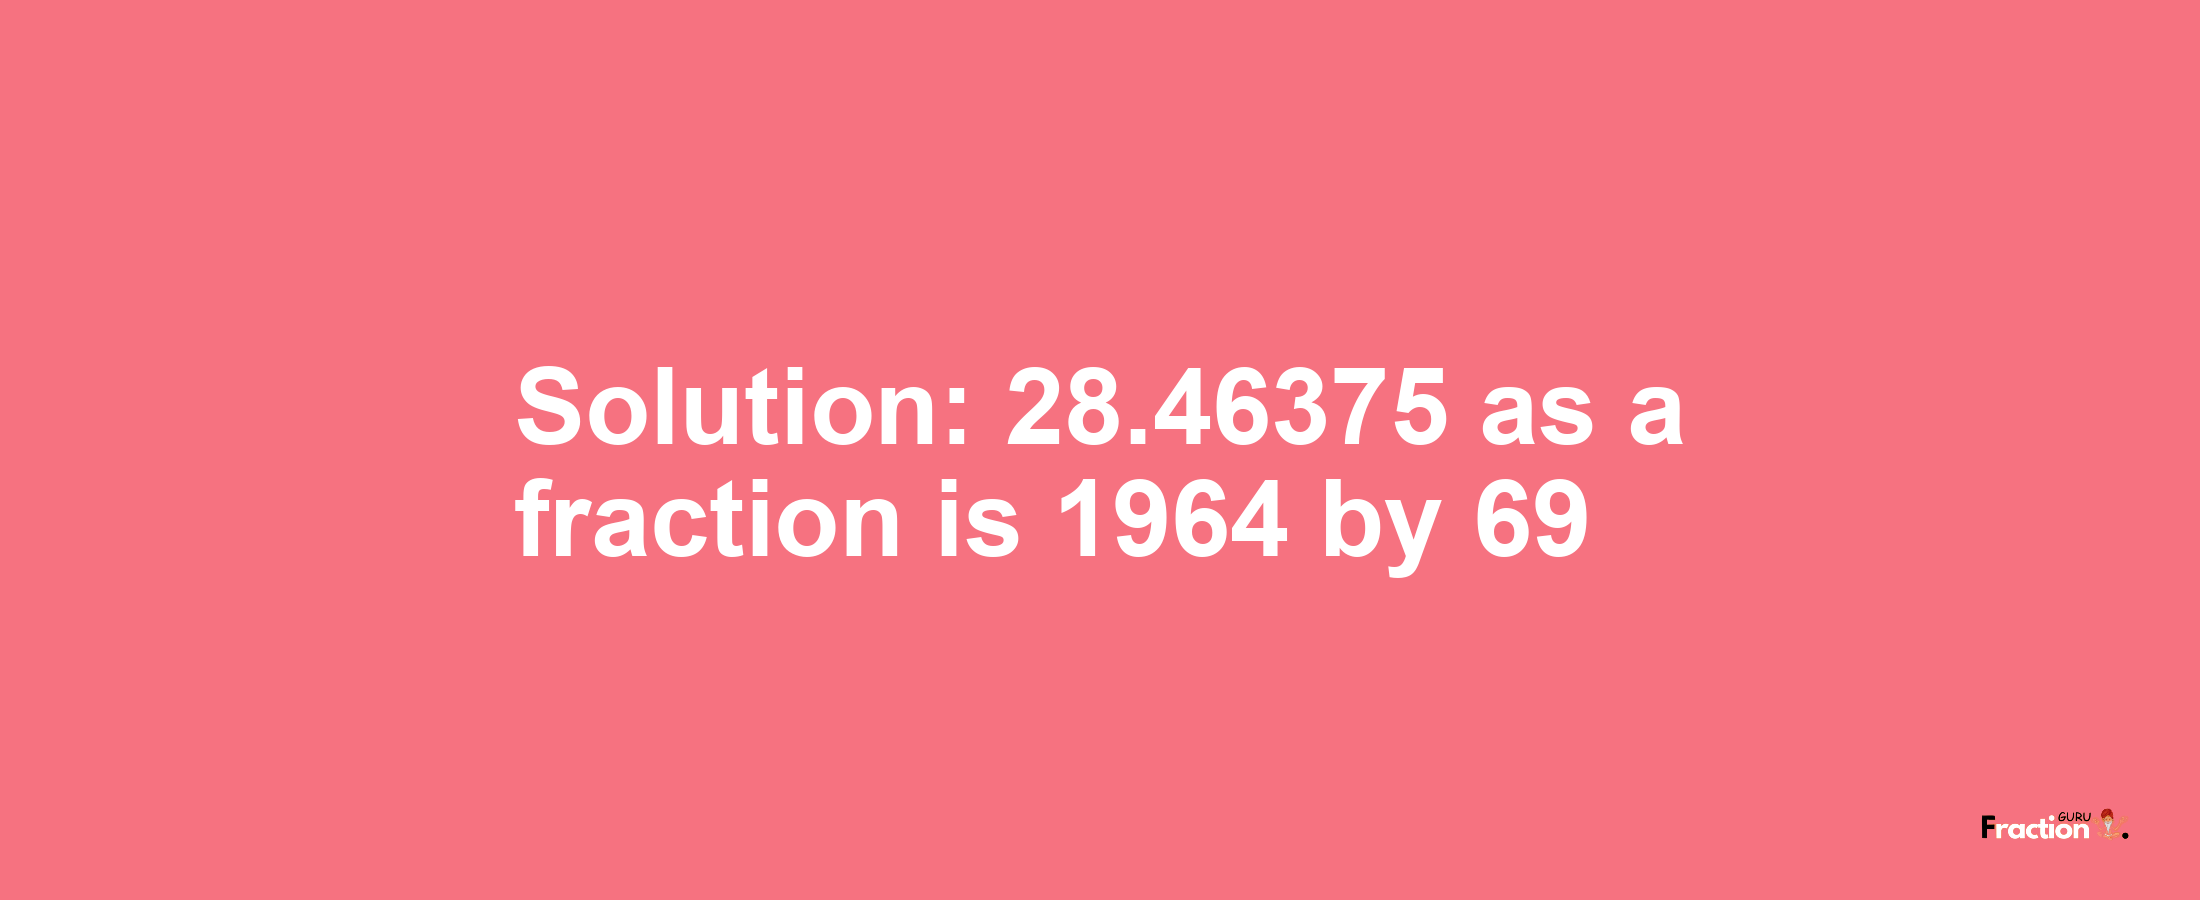 Solution:28.46375 as a fraction is 1964/69